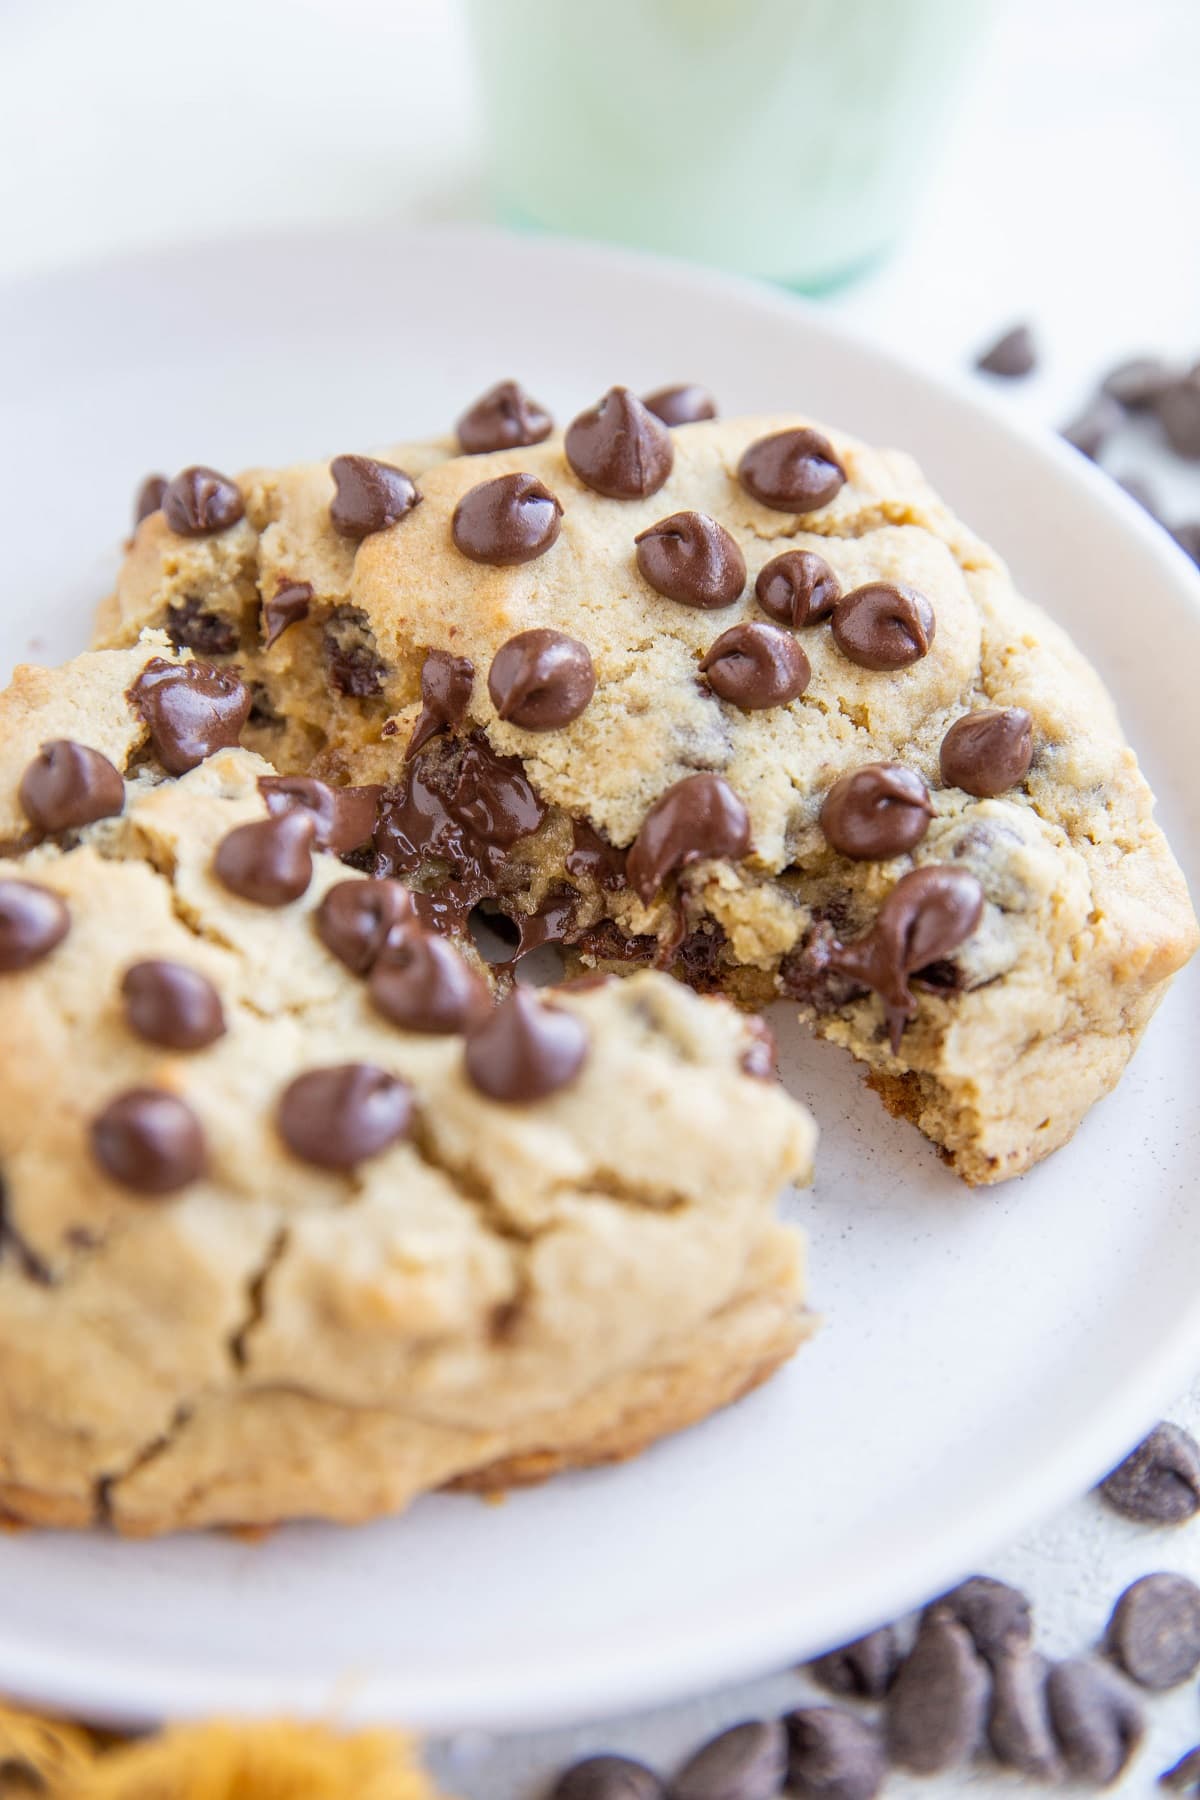 https://www.theroastedroot.net/wp-content/uploads/2023/04/one-giant-gluten-free-chocolate-chip-cookie-8.jpg